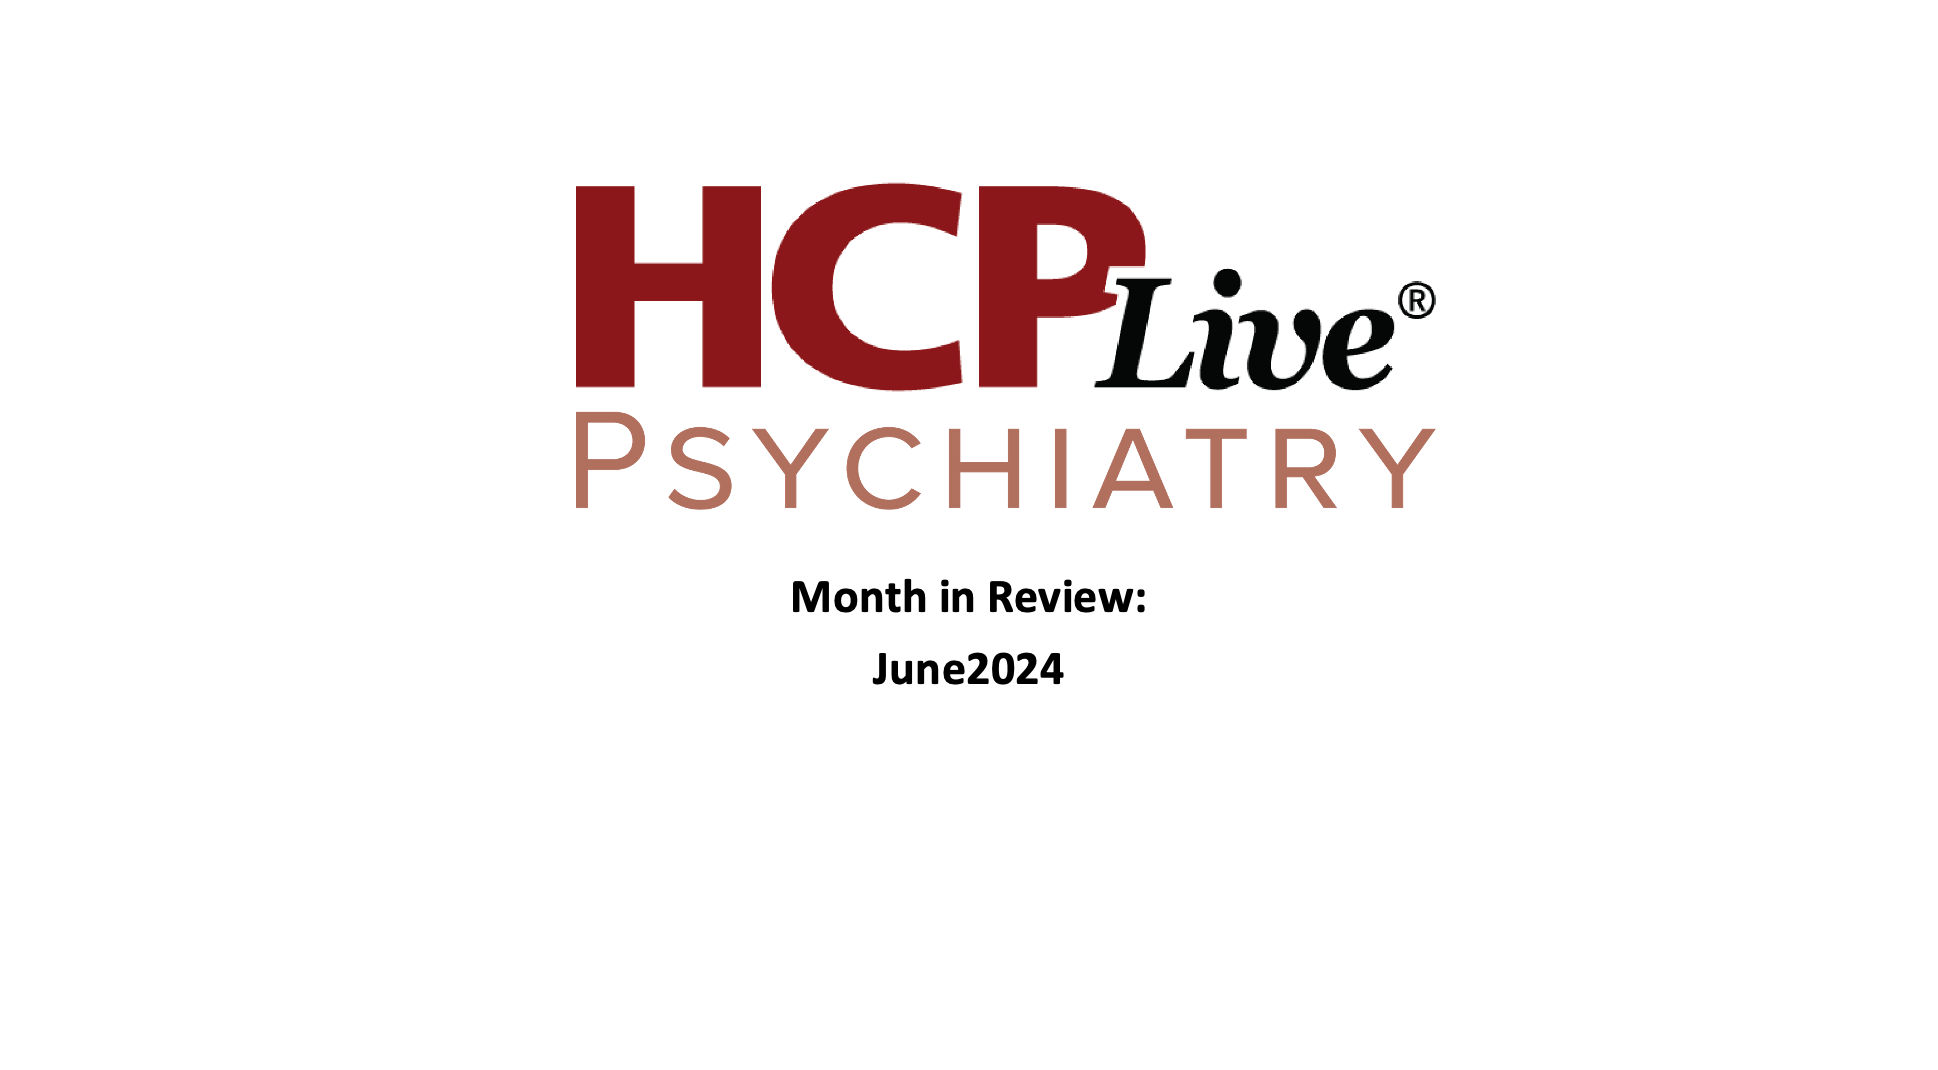 Psychiatry Month in Review: June 2024